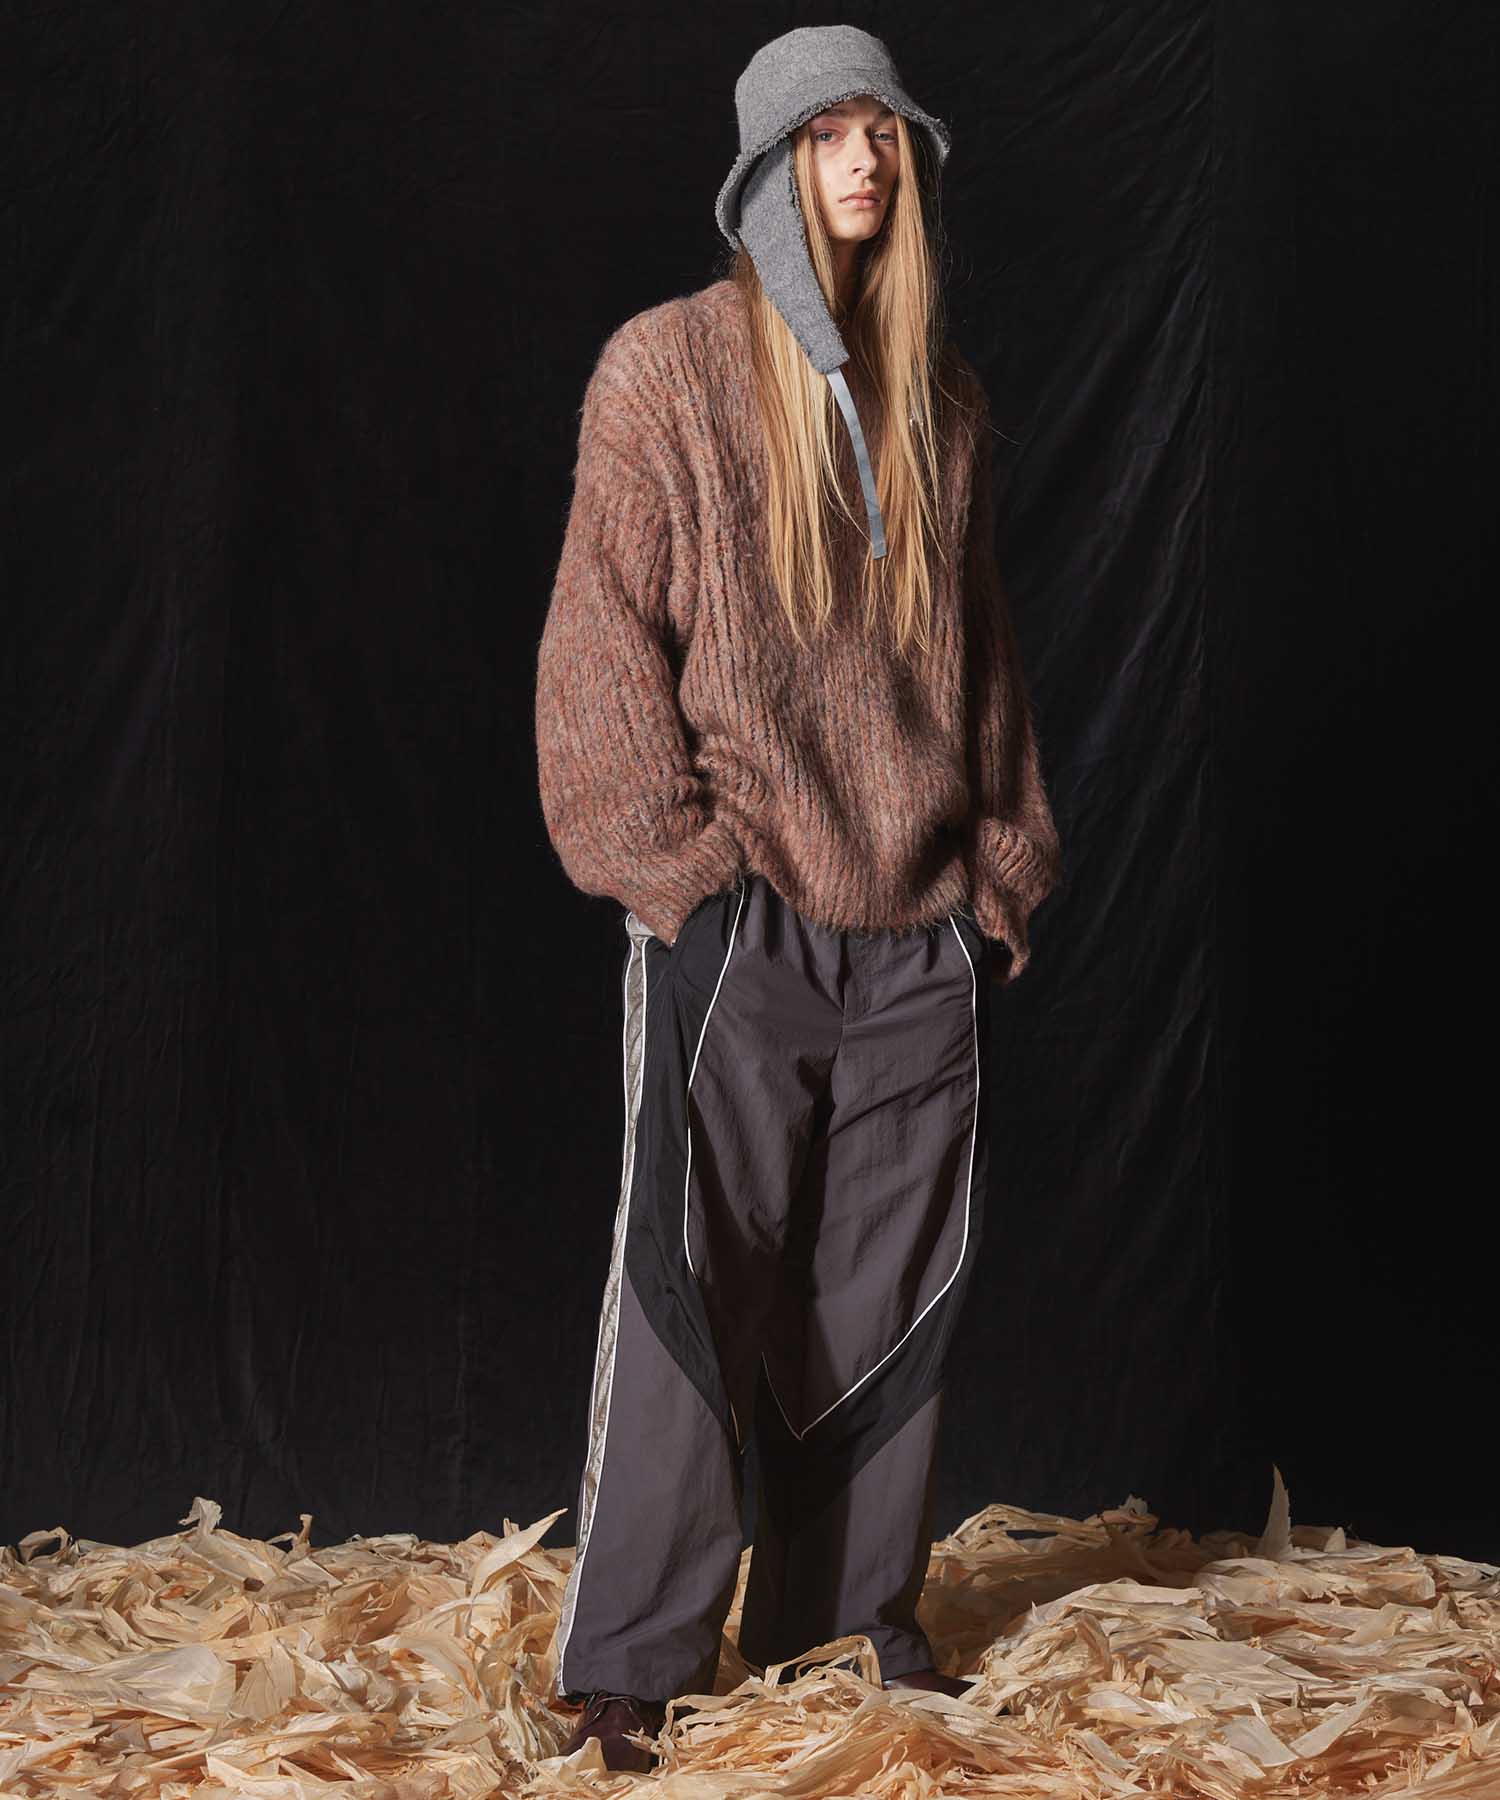 Mourine Brushed Kid Mohair Crew Neck Knit Pullover